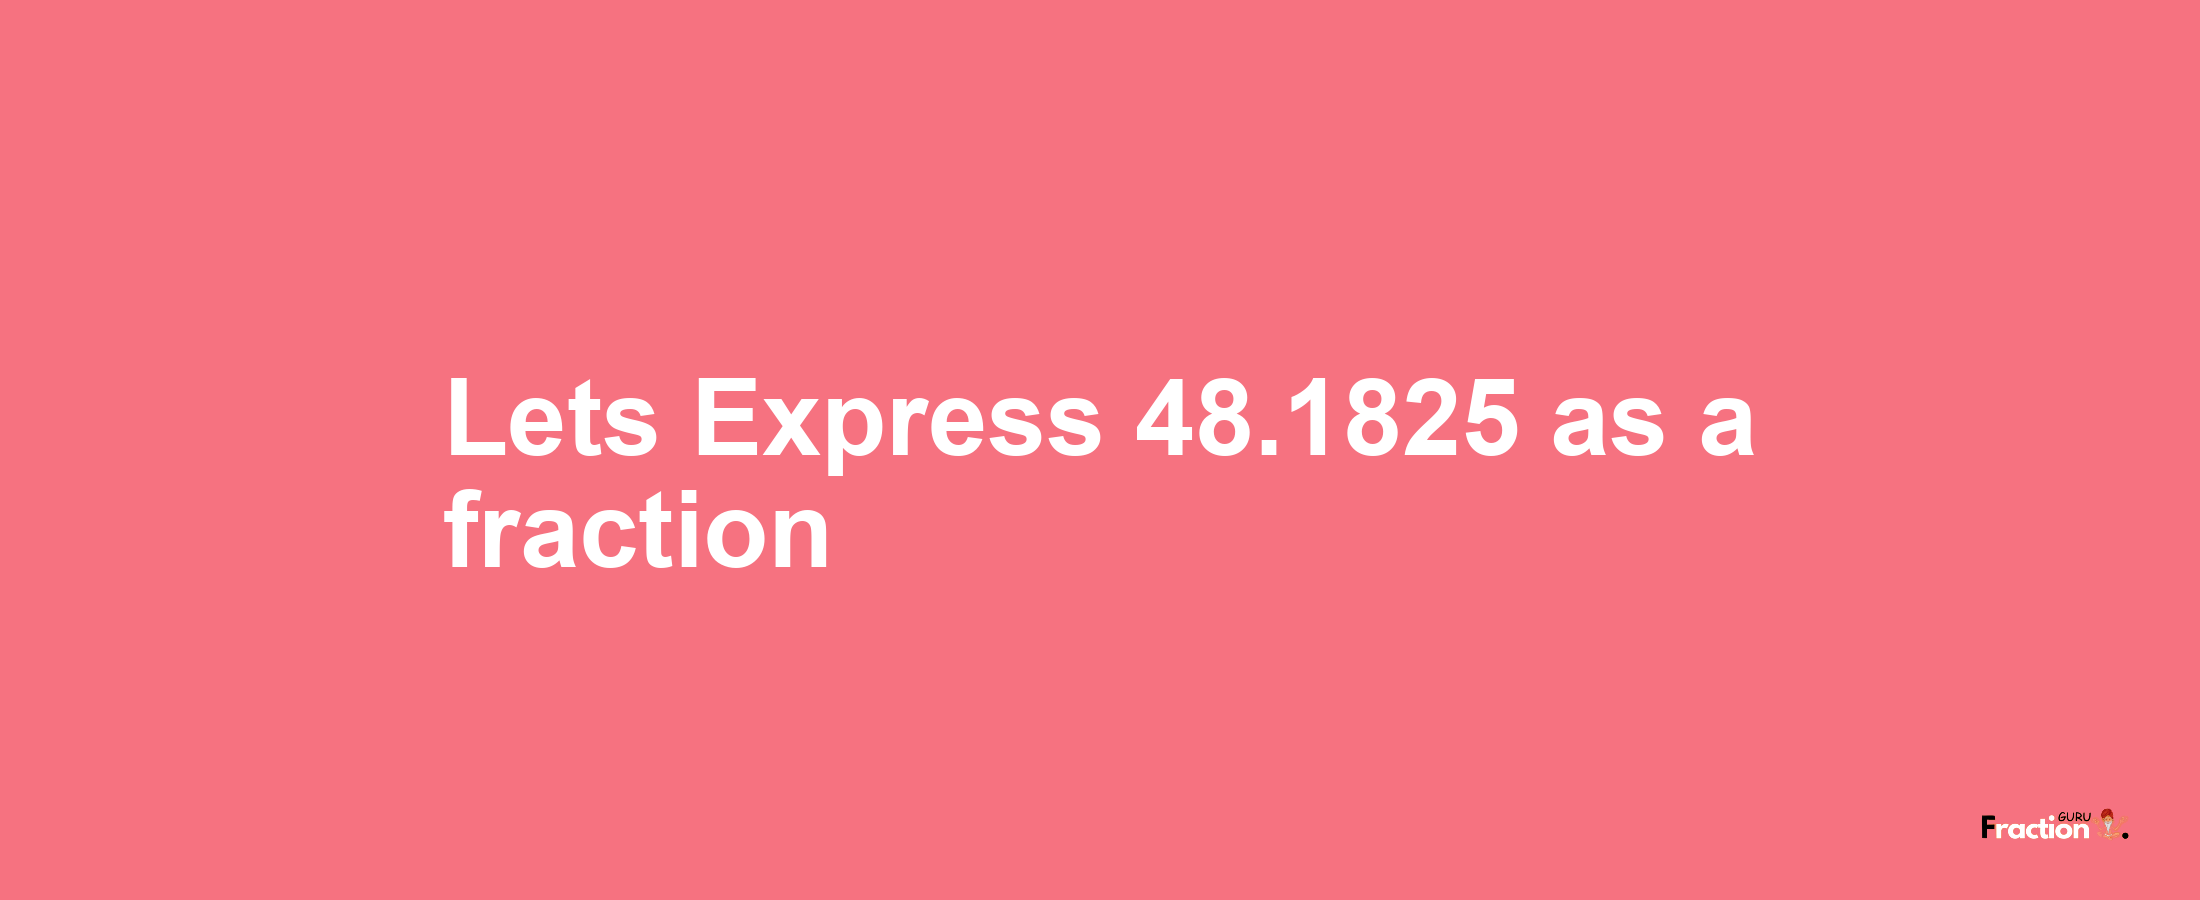 Lets Express 48.1825 as afraction